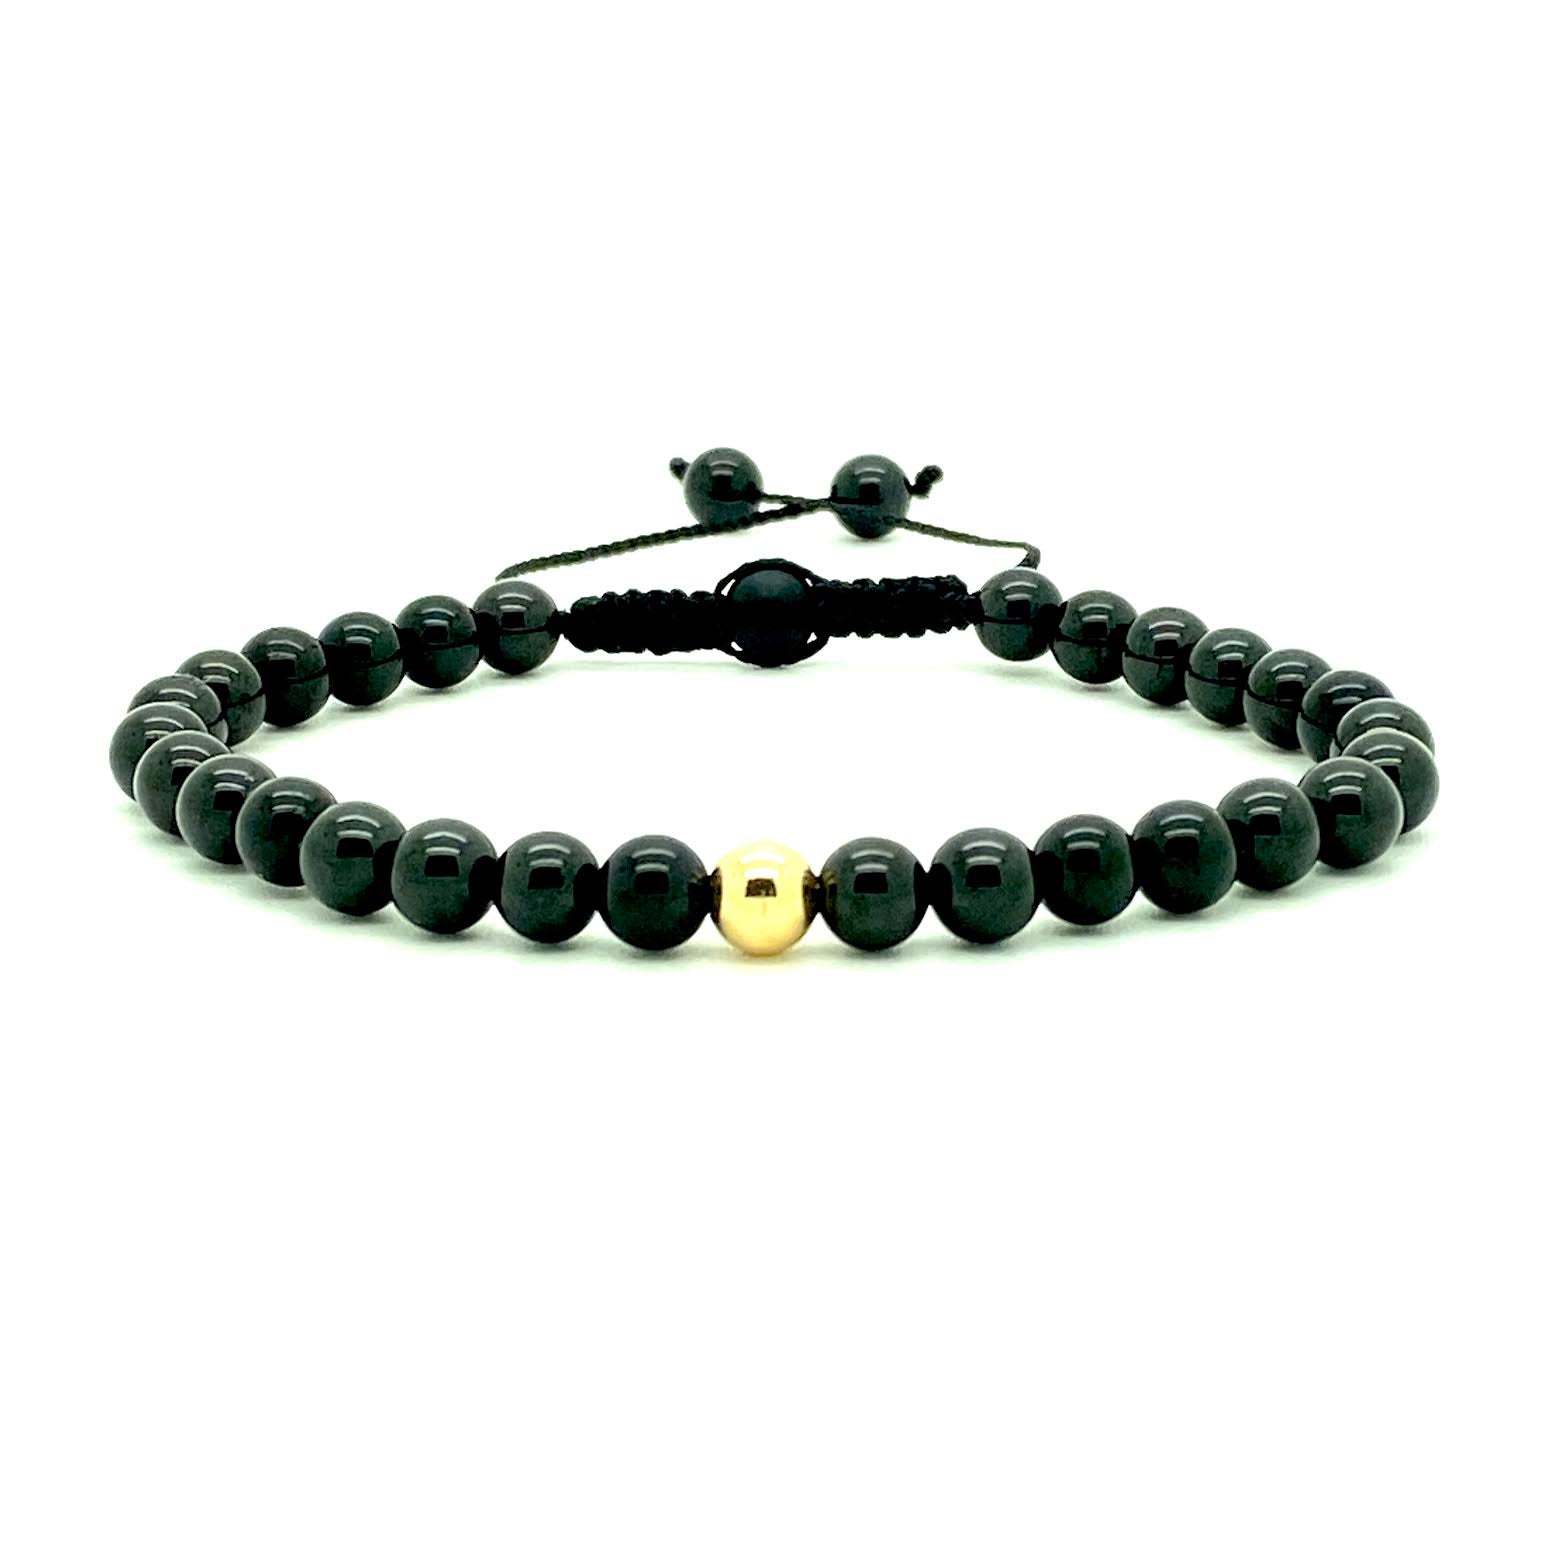 Trendy black spinel beads accented with your choice of 14K white, rose or yellow gold beads. Hand knotted adjustable cord for a perfect fit. Made by WristBend